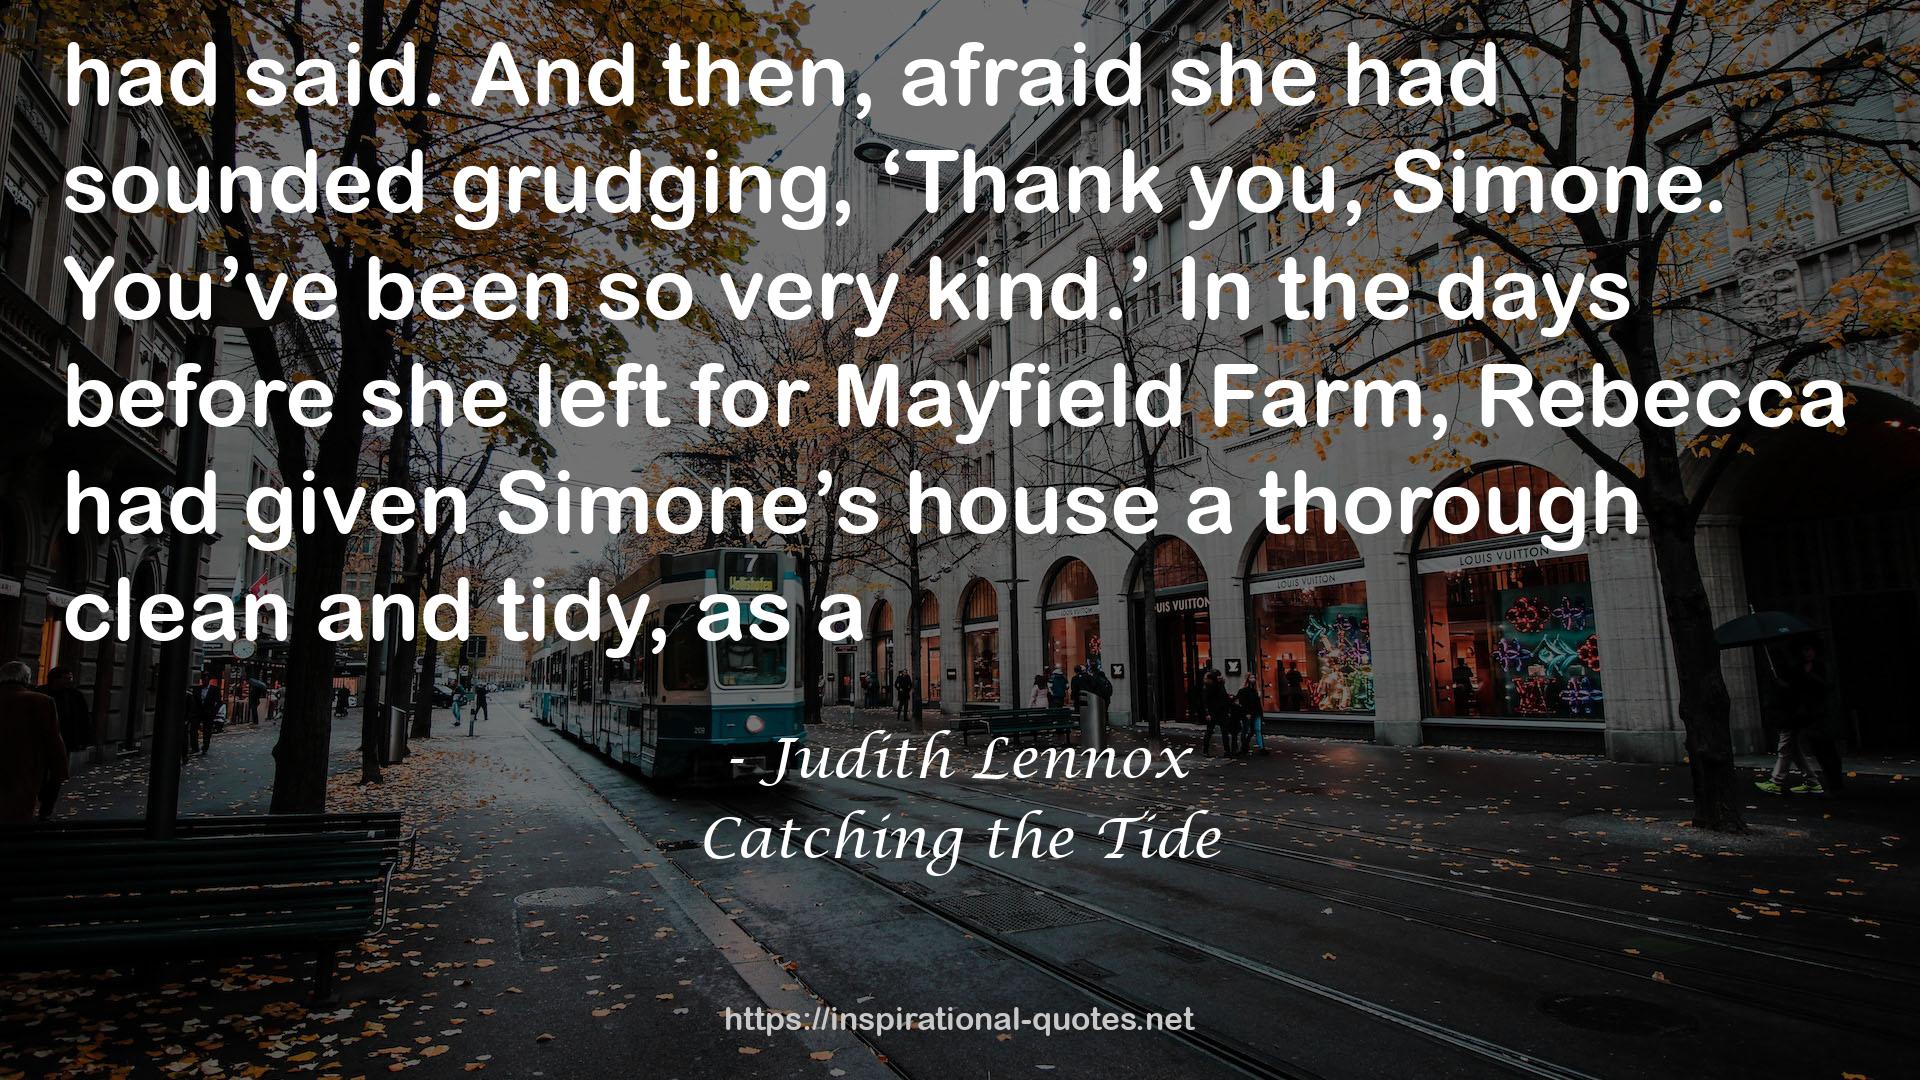 Catching the Tide QUOTES